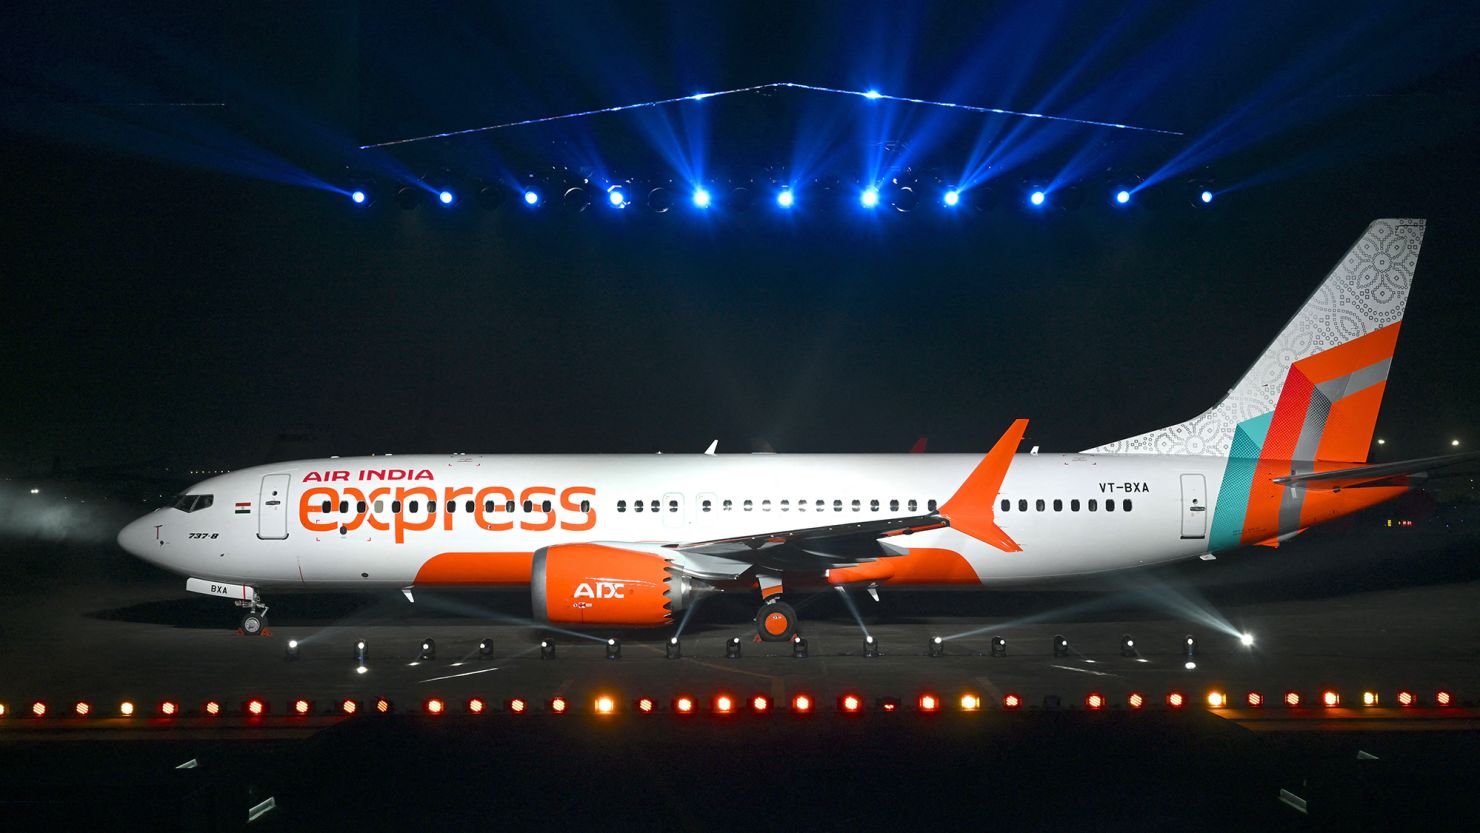 An Air India Express Boeing 737 MAX passenger aircraft is seen during an event in Mumbai, India, in October 2023.